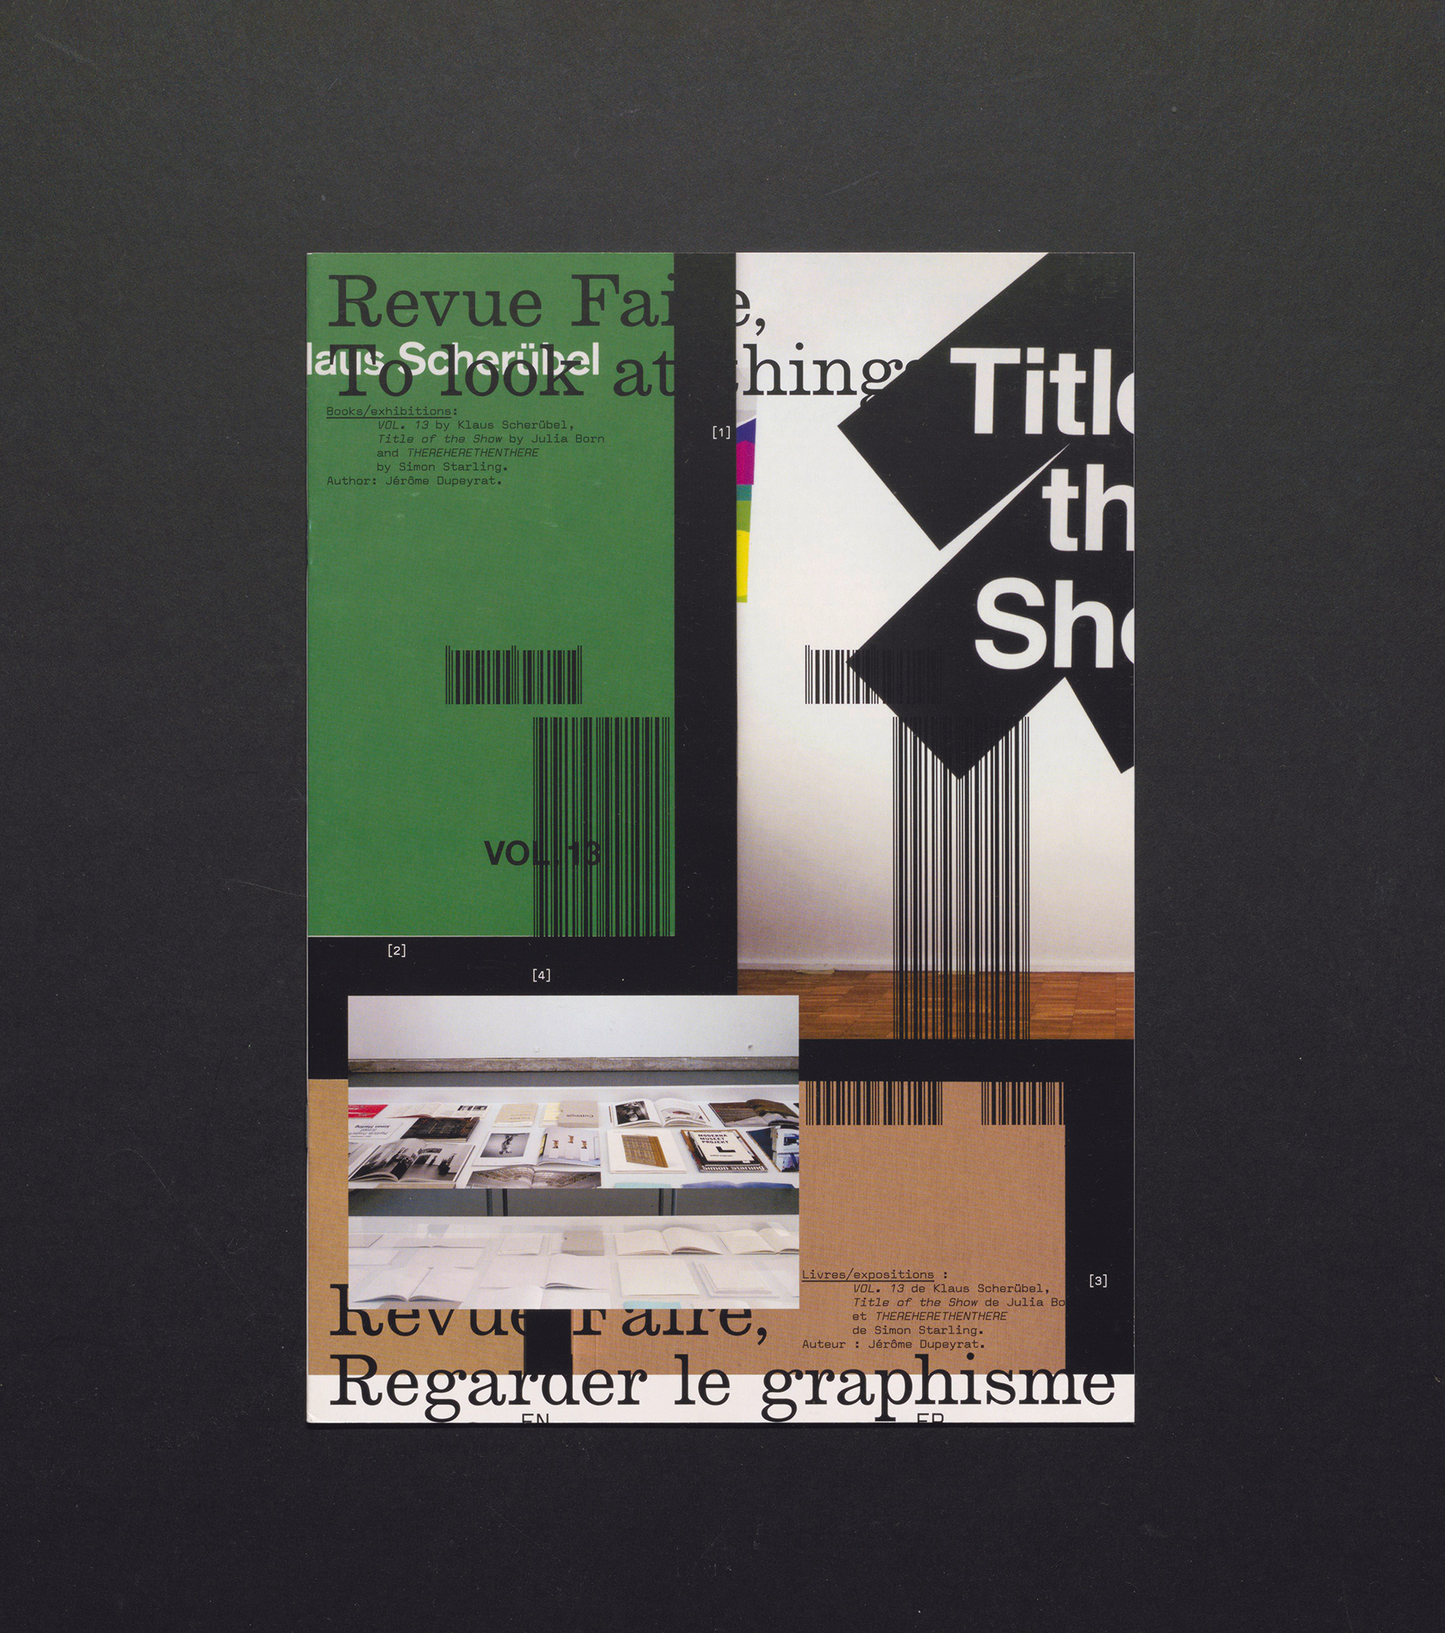 Revue Faire No. 11 - Books/exhibitions: VOL. 13 by Klaus Scherübel, Title of the Show by Julia Born and THEREHERETHENTHERE by Simon Starling.